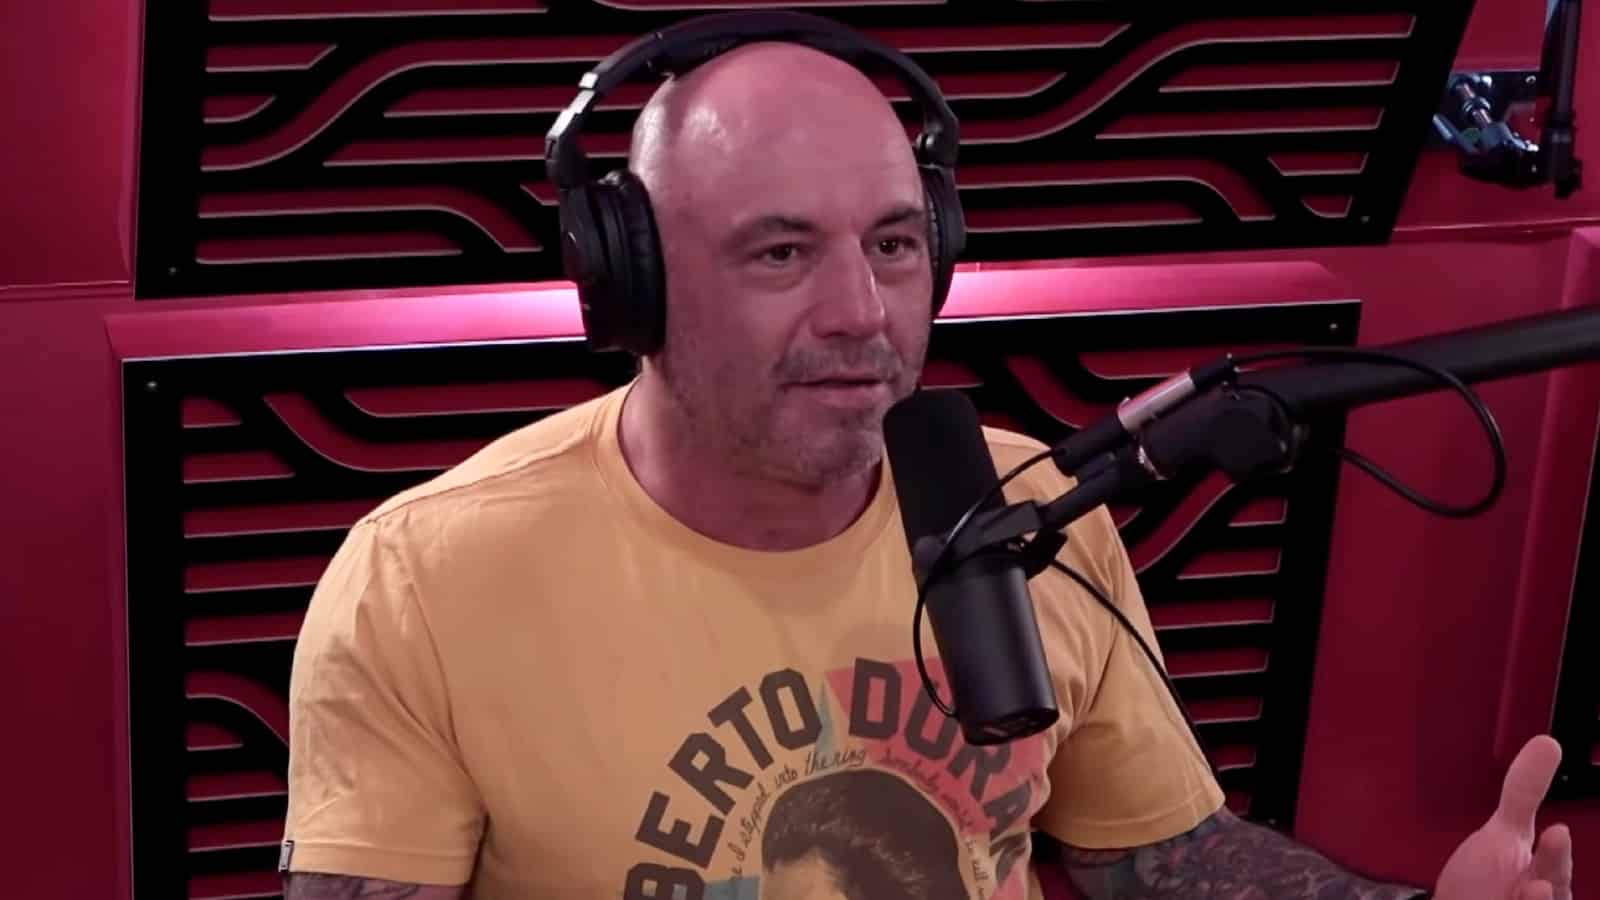 Joe Rogan offered $100m to bring podcast to rumble